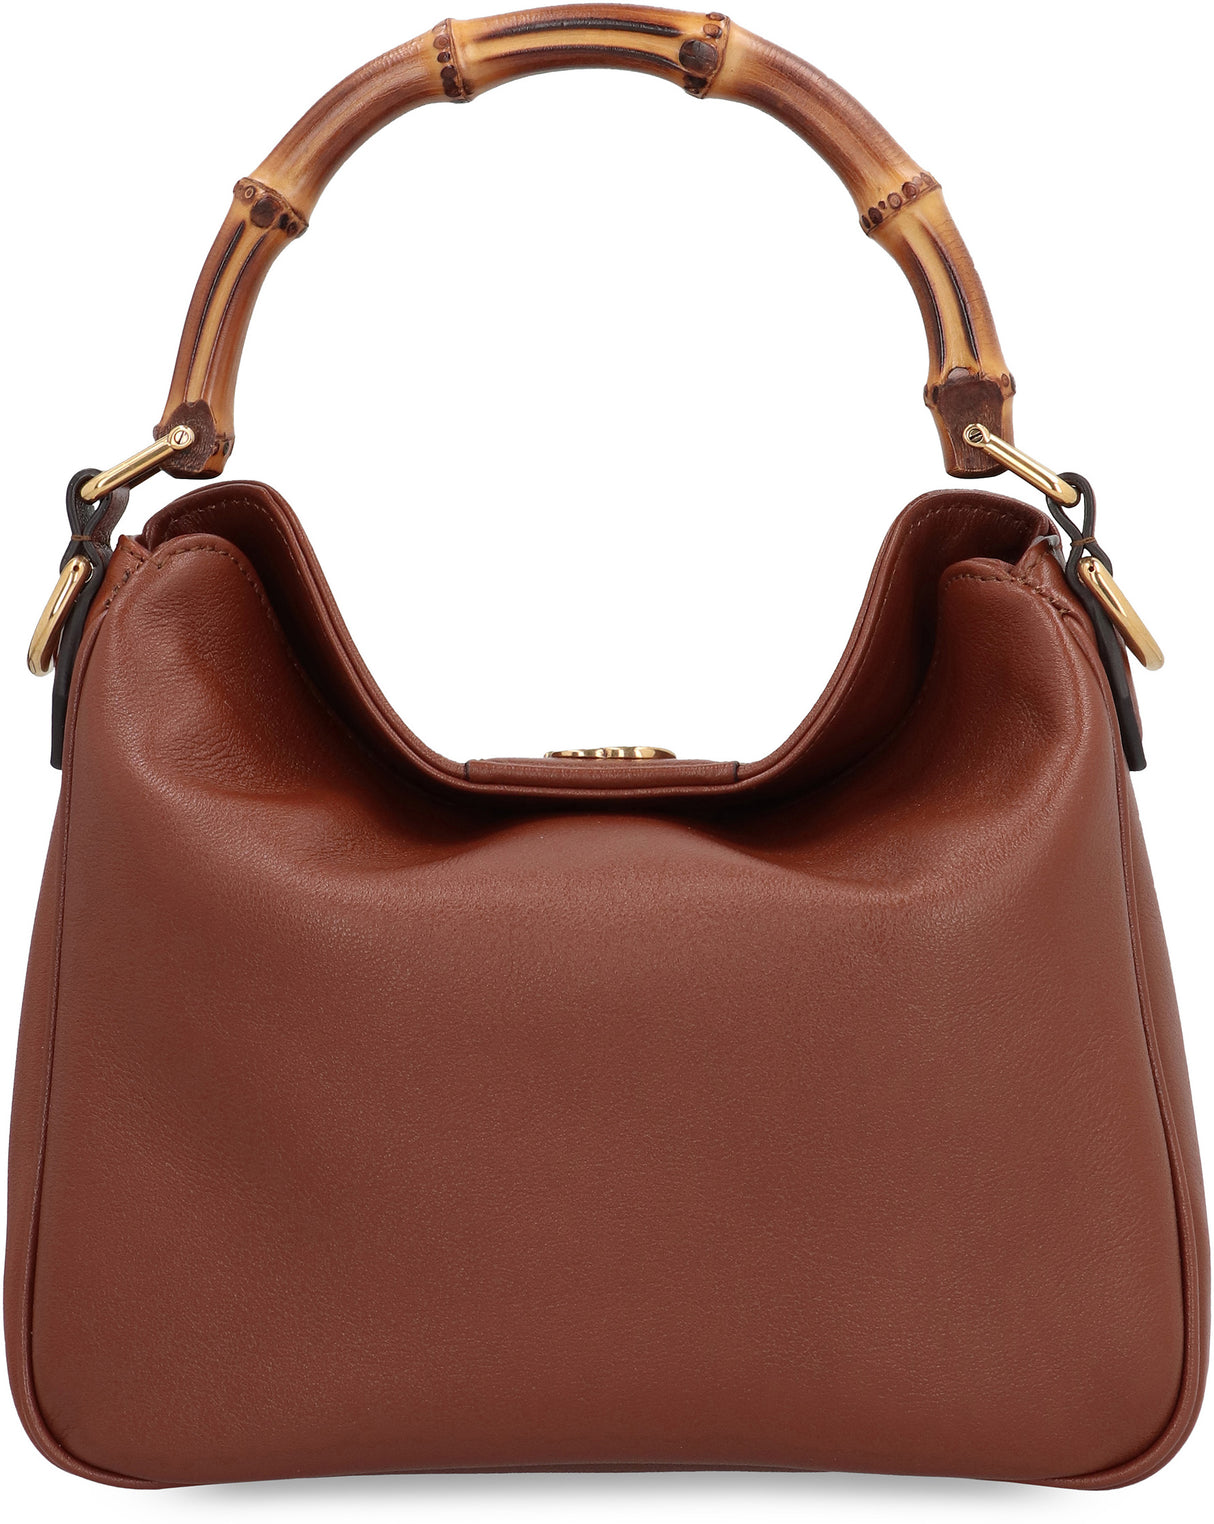 GUCCI Trendy and Luxurious Brown Leather Shoulder Handbag